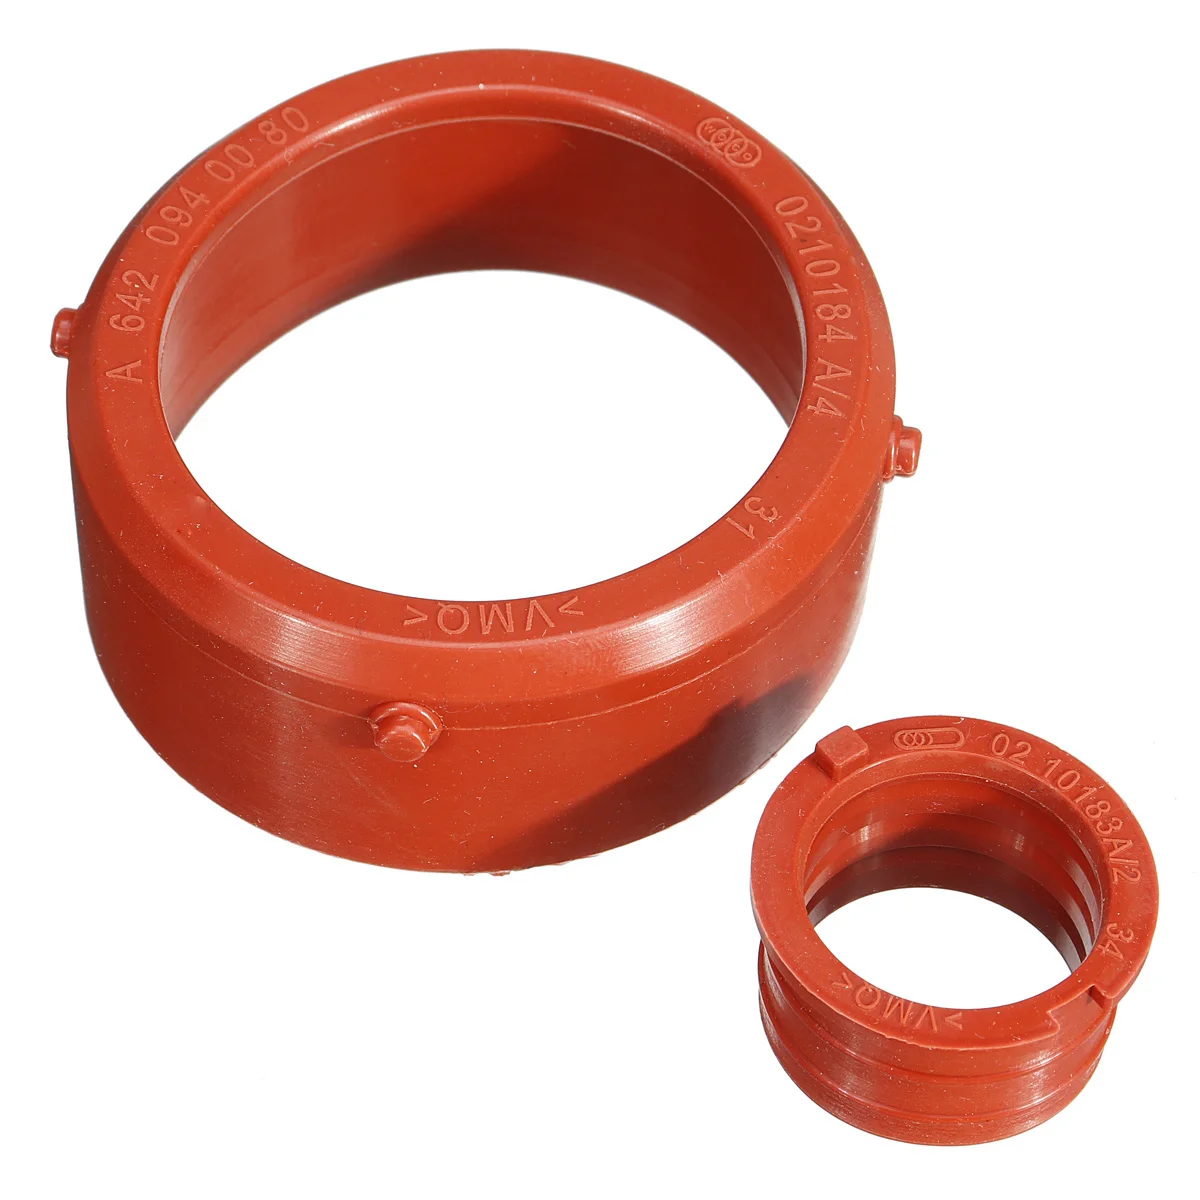 Turbo Intake Seal A6420940080 Turbo Intake Seal and Engine Breather Seal Kit for OM642 Engines Breather Seal 